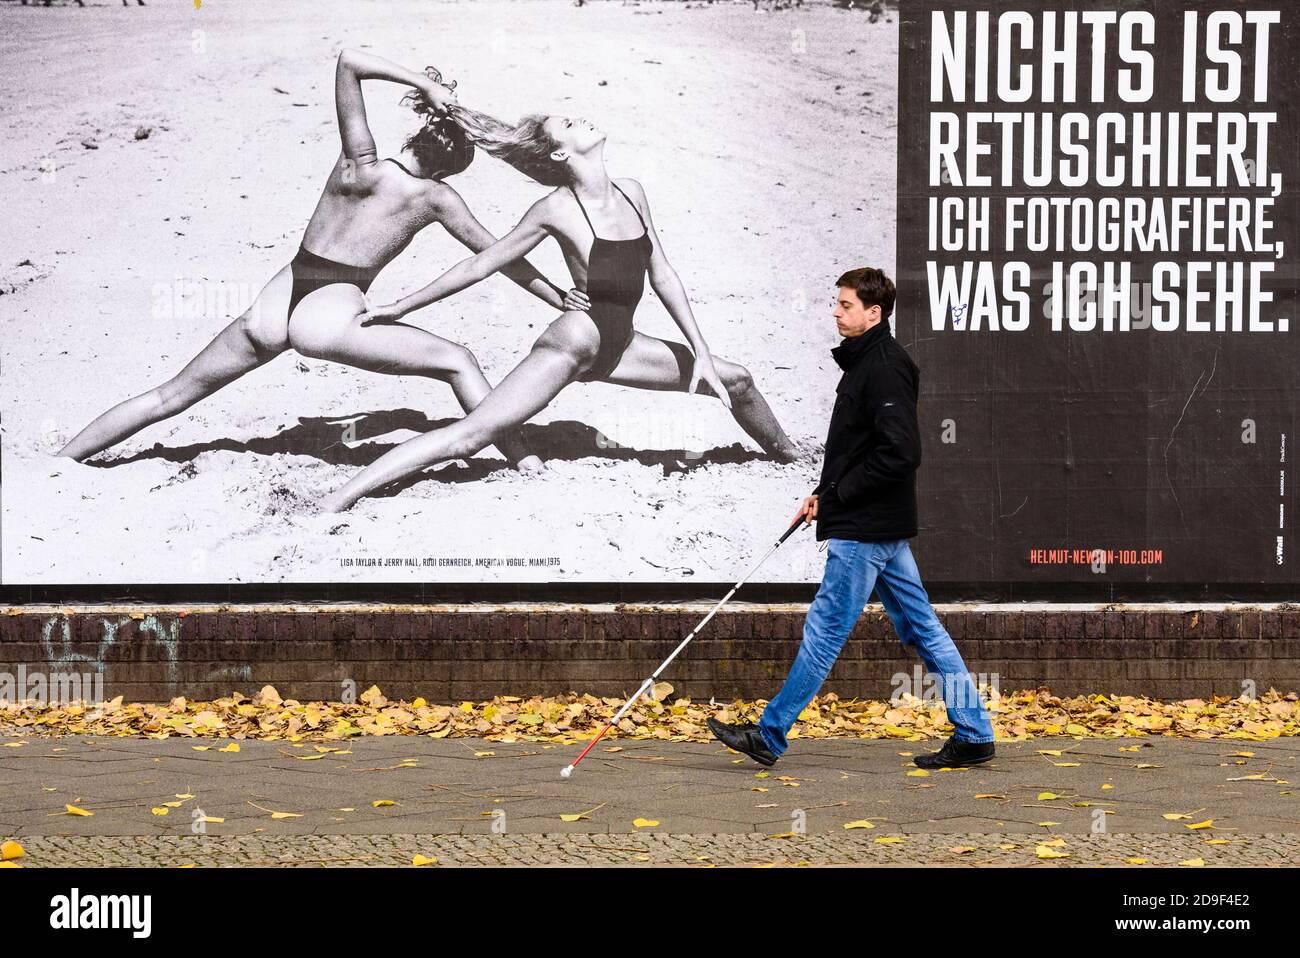 Germany, Berlin, November 05, 2020: A man with a cane for the blind walks in front of a large black and white photograph by fashion photographer Hetmut Newton next to a lettering reading 'Nothing is retouched, I photograph what I see' (German: 'Nicht ist retuschiert, ich fotografie was ich sehe'). On the occasion of the 100th birthday of German-Australian photographer Helmut Newton (born Helmut Neustaedter), the Helmut Newton Foundation is presenting the exhibition 'Helmut Newton One Hundred' with 30 selected works from October 31 to November 8, 2020. The photo exhibition covers the 85 meter l Stock Photo